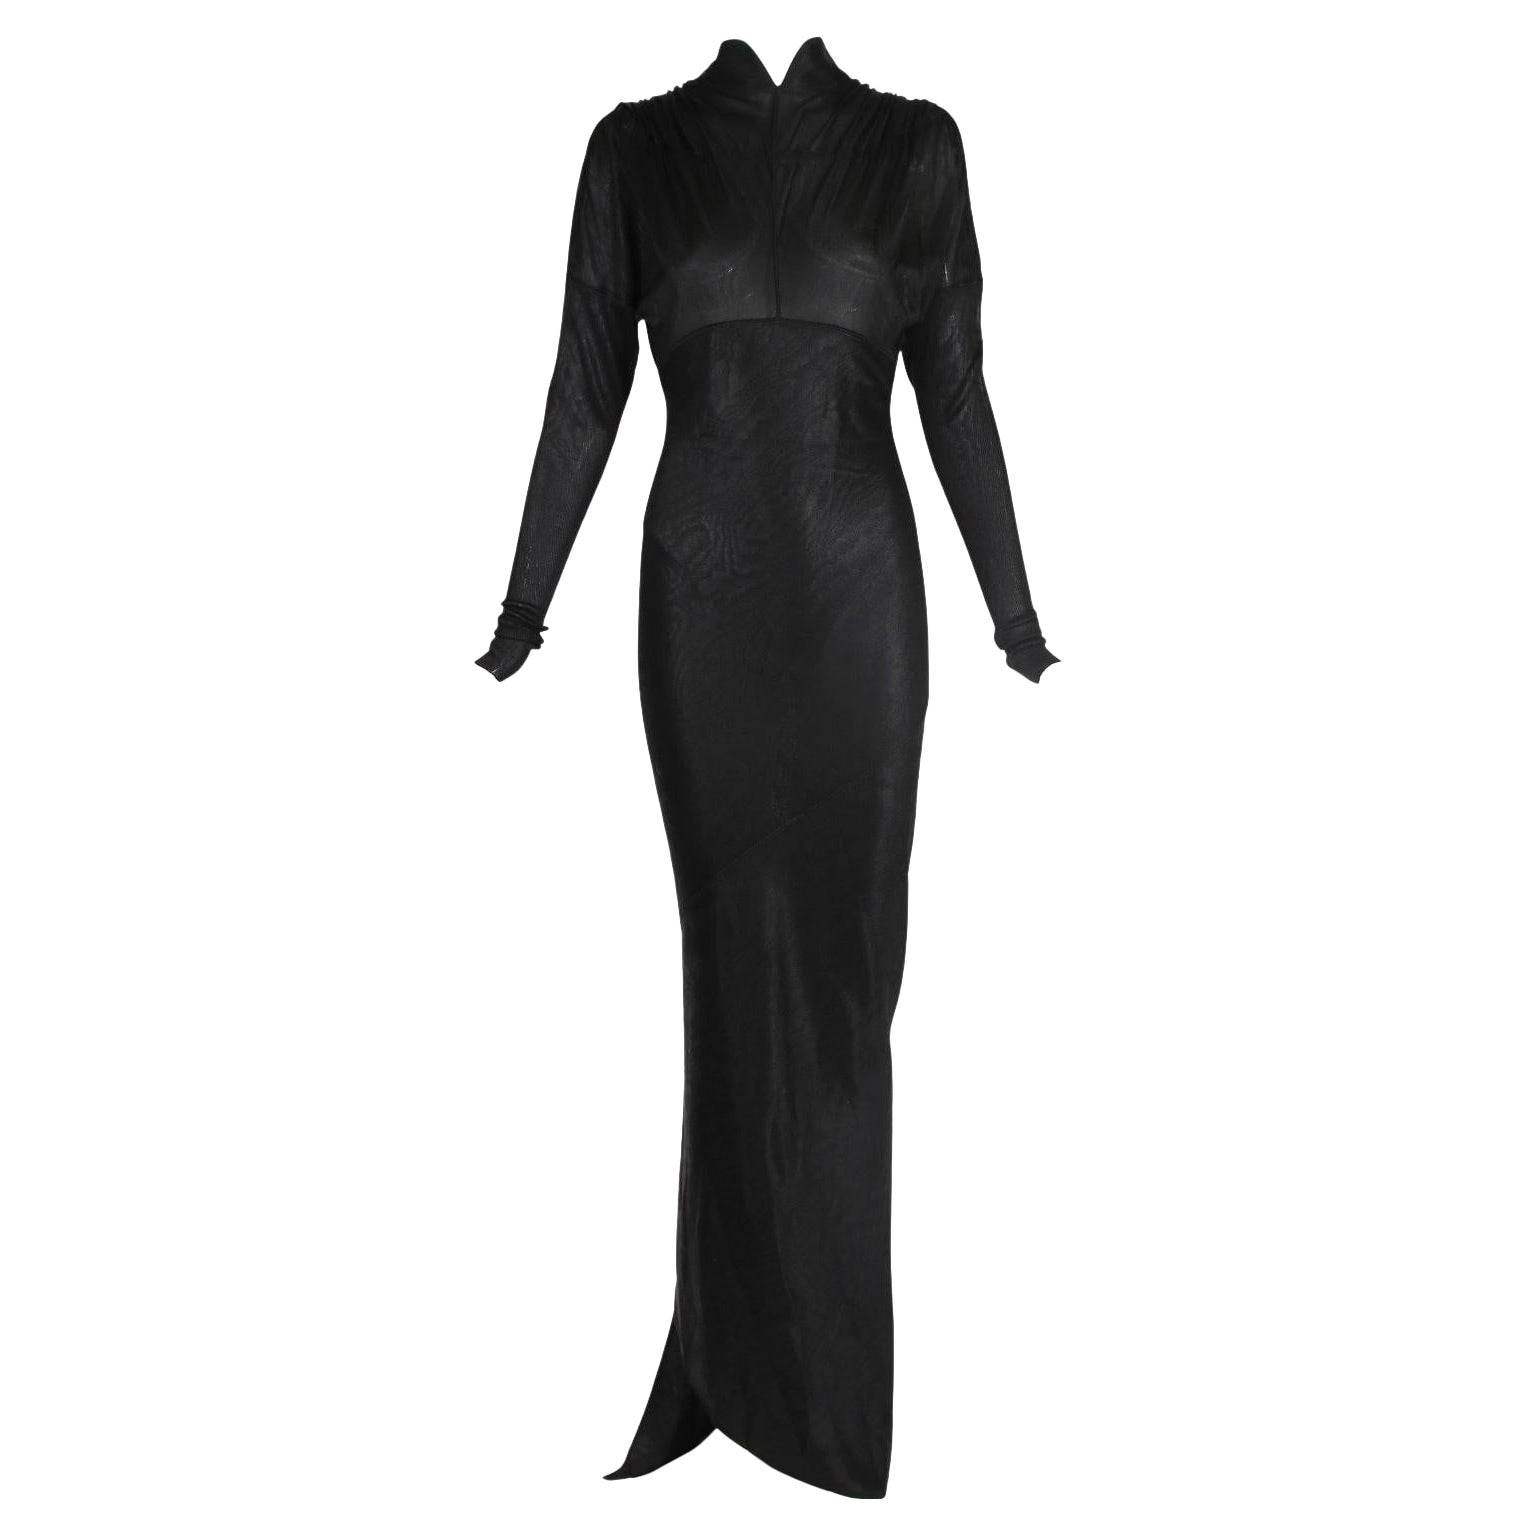 Iconic Azzedine Alaia Black Bodycon Trained Gown, 1986 For Sale